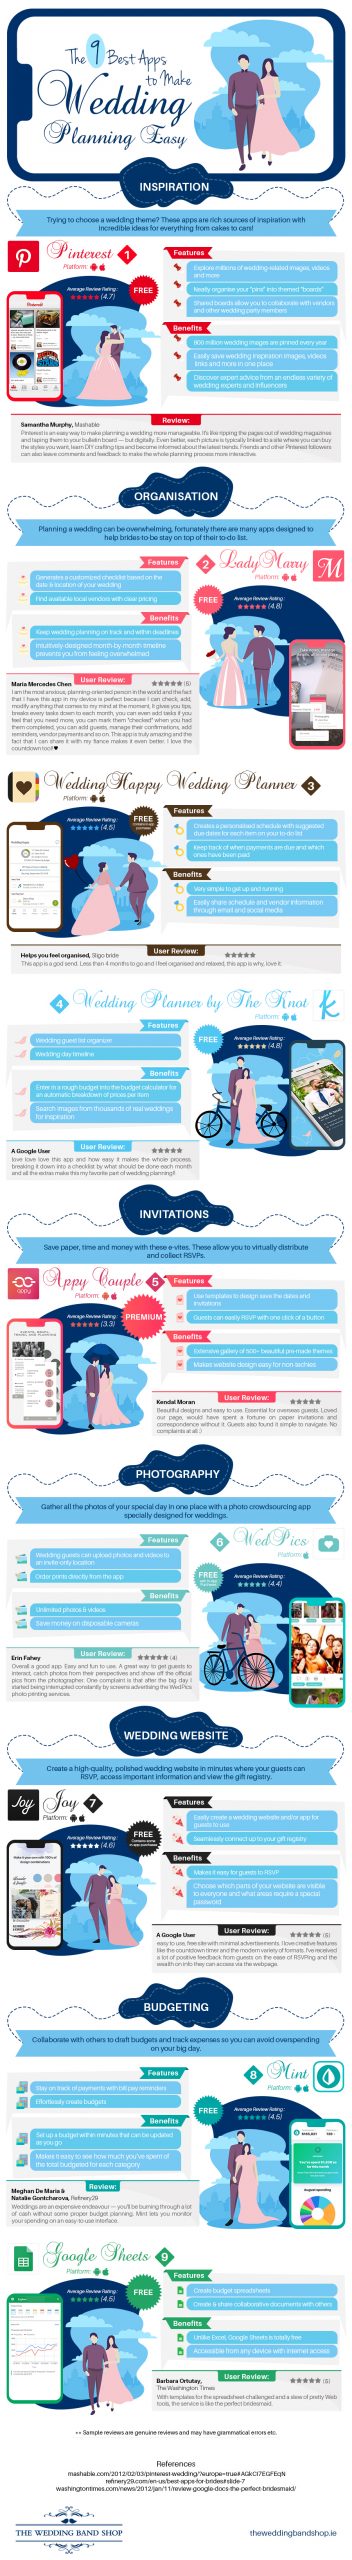 9 Best Apps to Make Wedding Planning EasyInfographic scaled